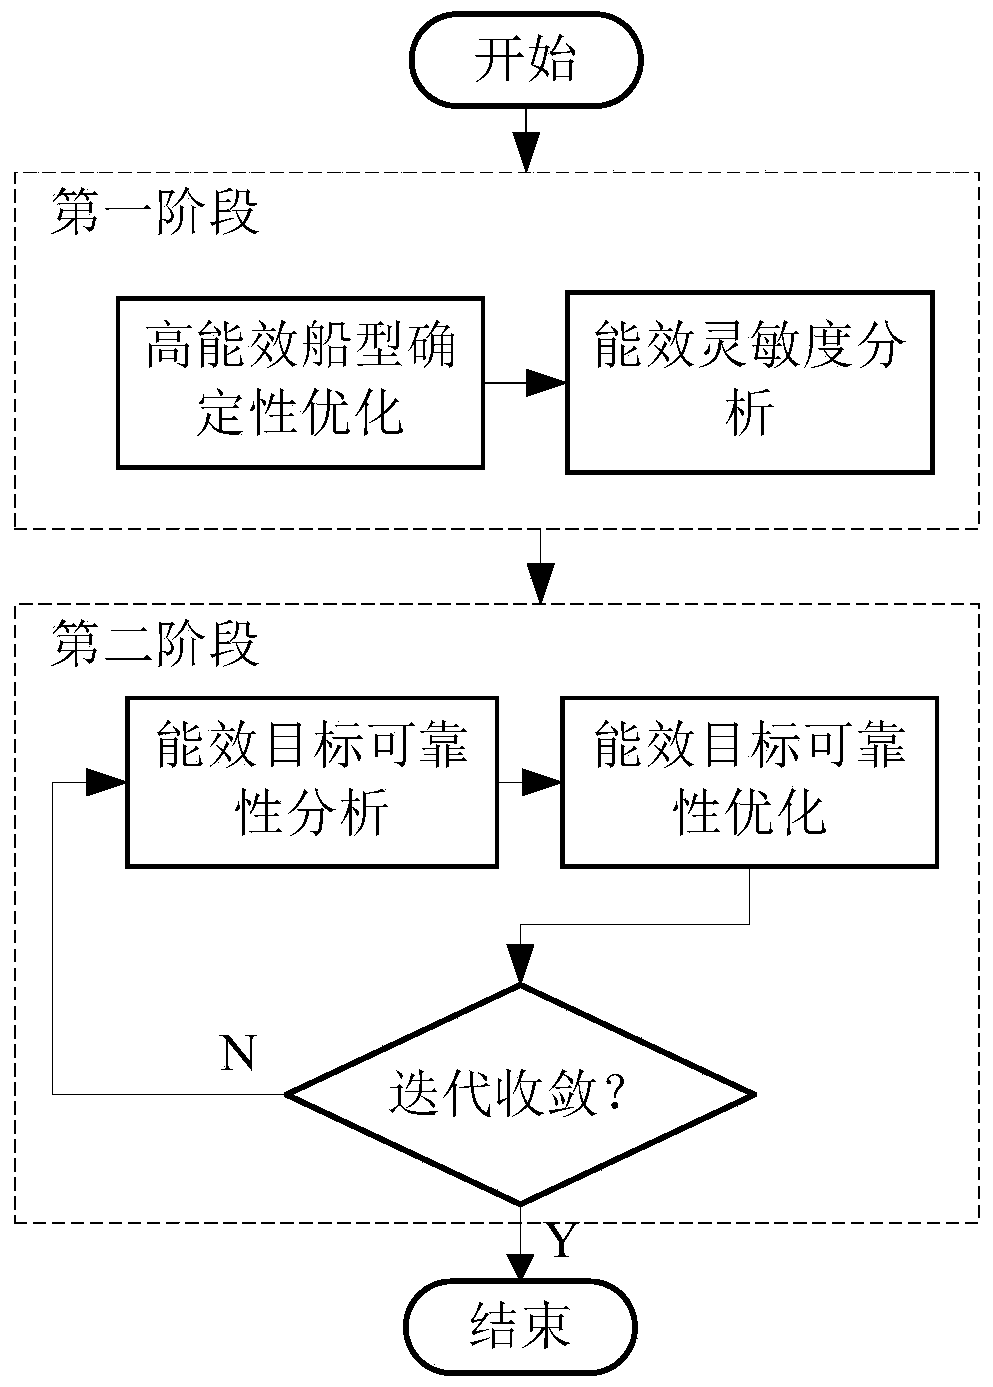 Two-stage high-energy-efficiency ship type optimization design method